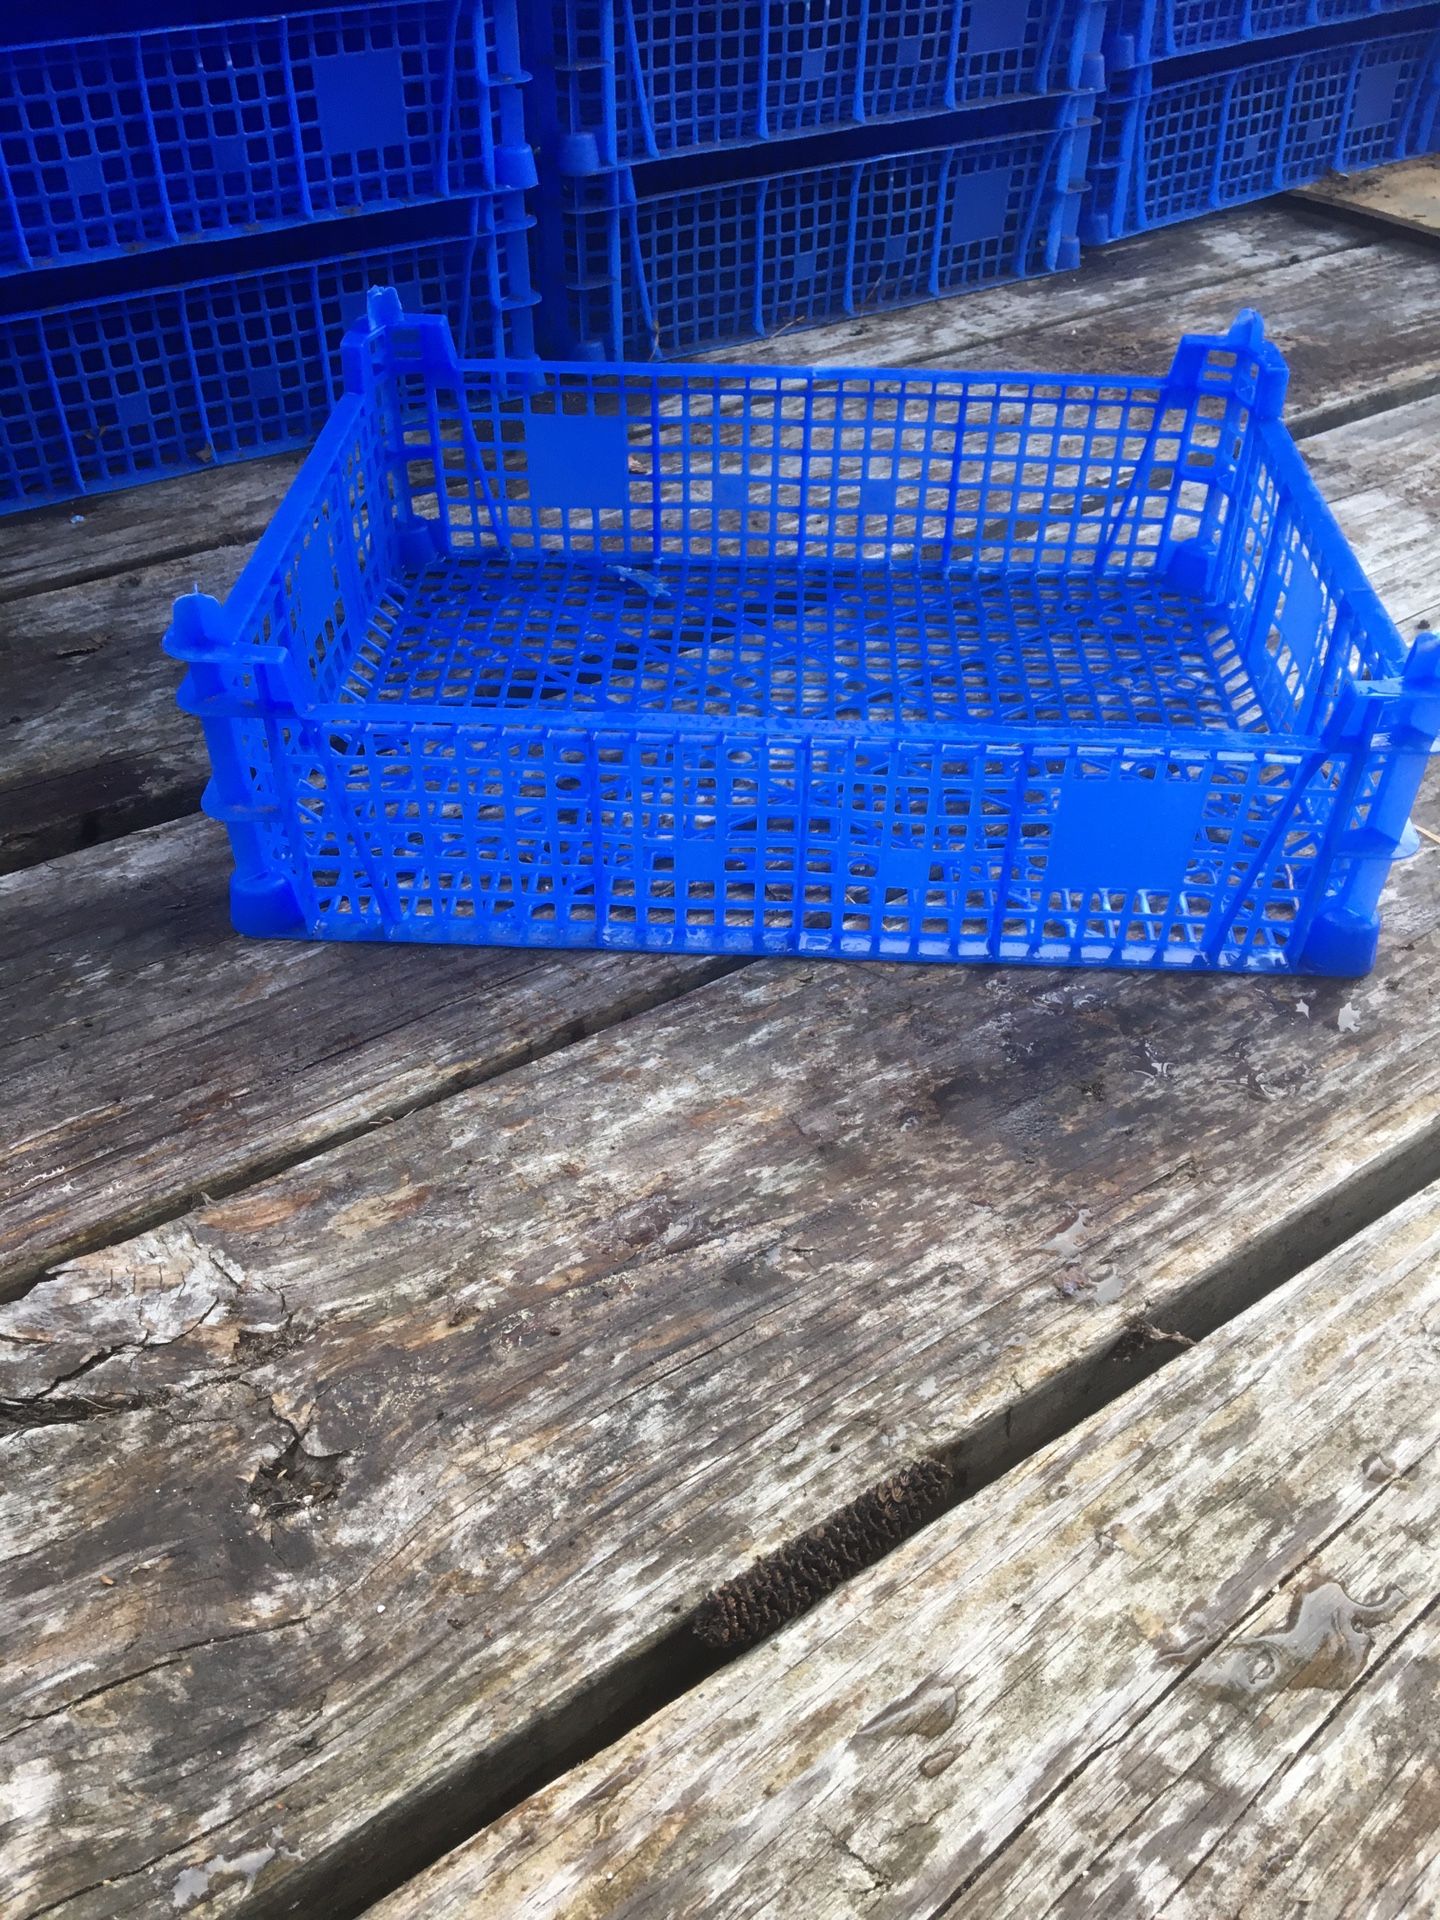 Plastic Pallets and Crates